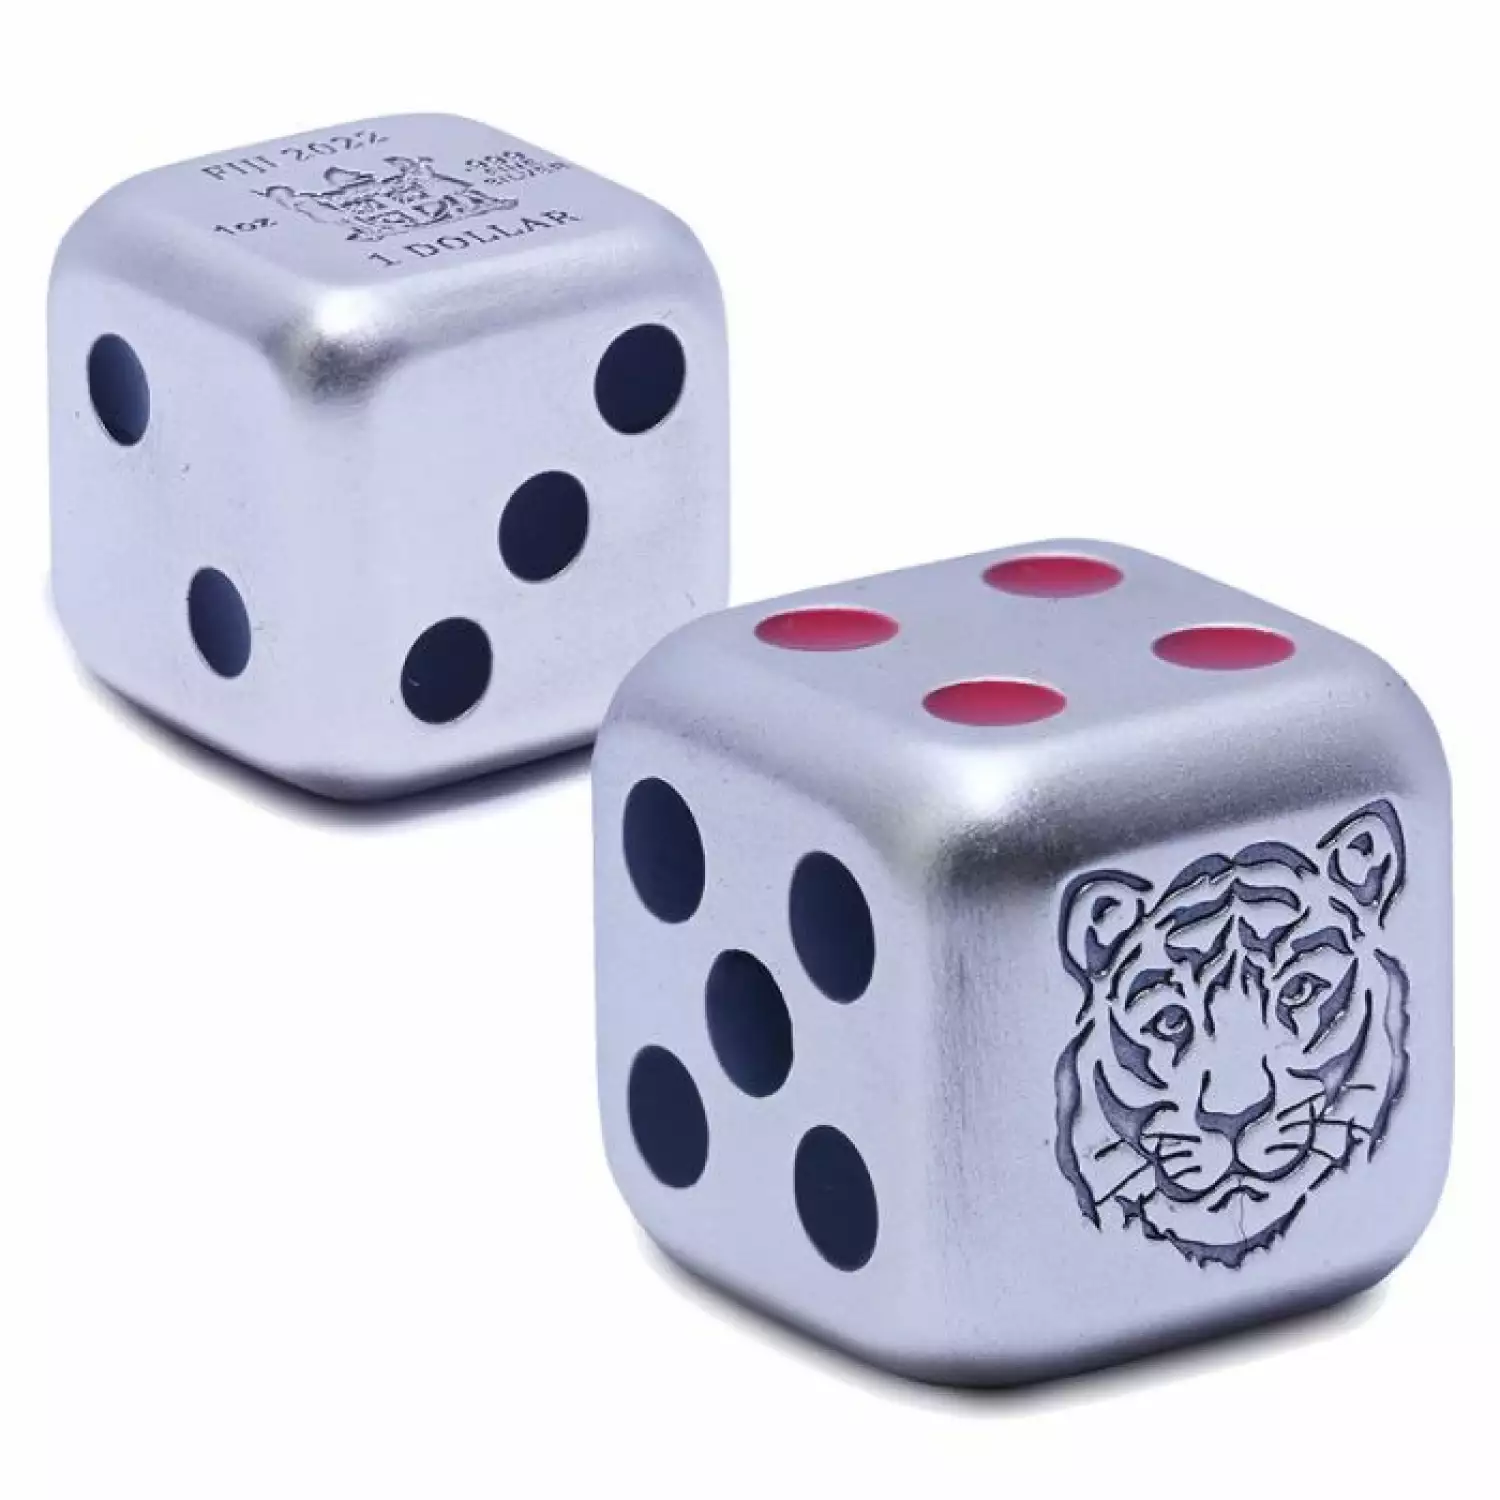 2022 1oz Lunar Year of the Tiger Dice Colllorized Antiqued Set Silver (2)